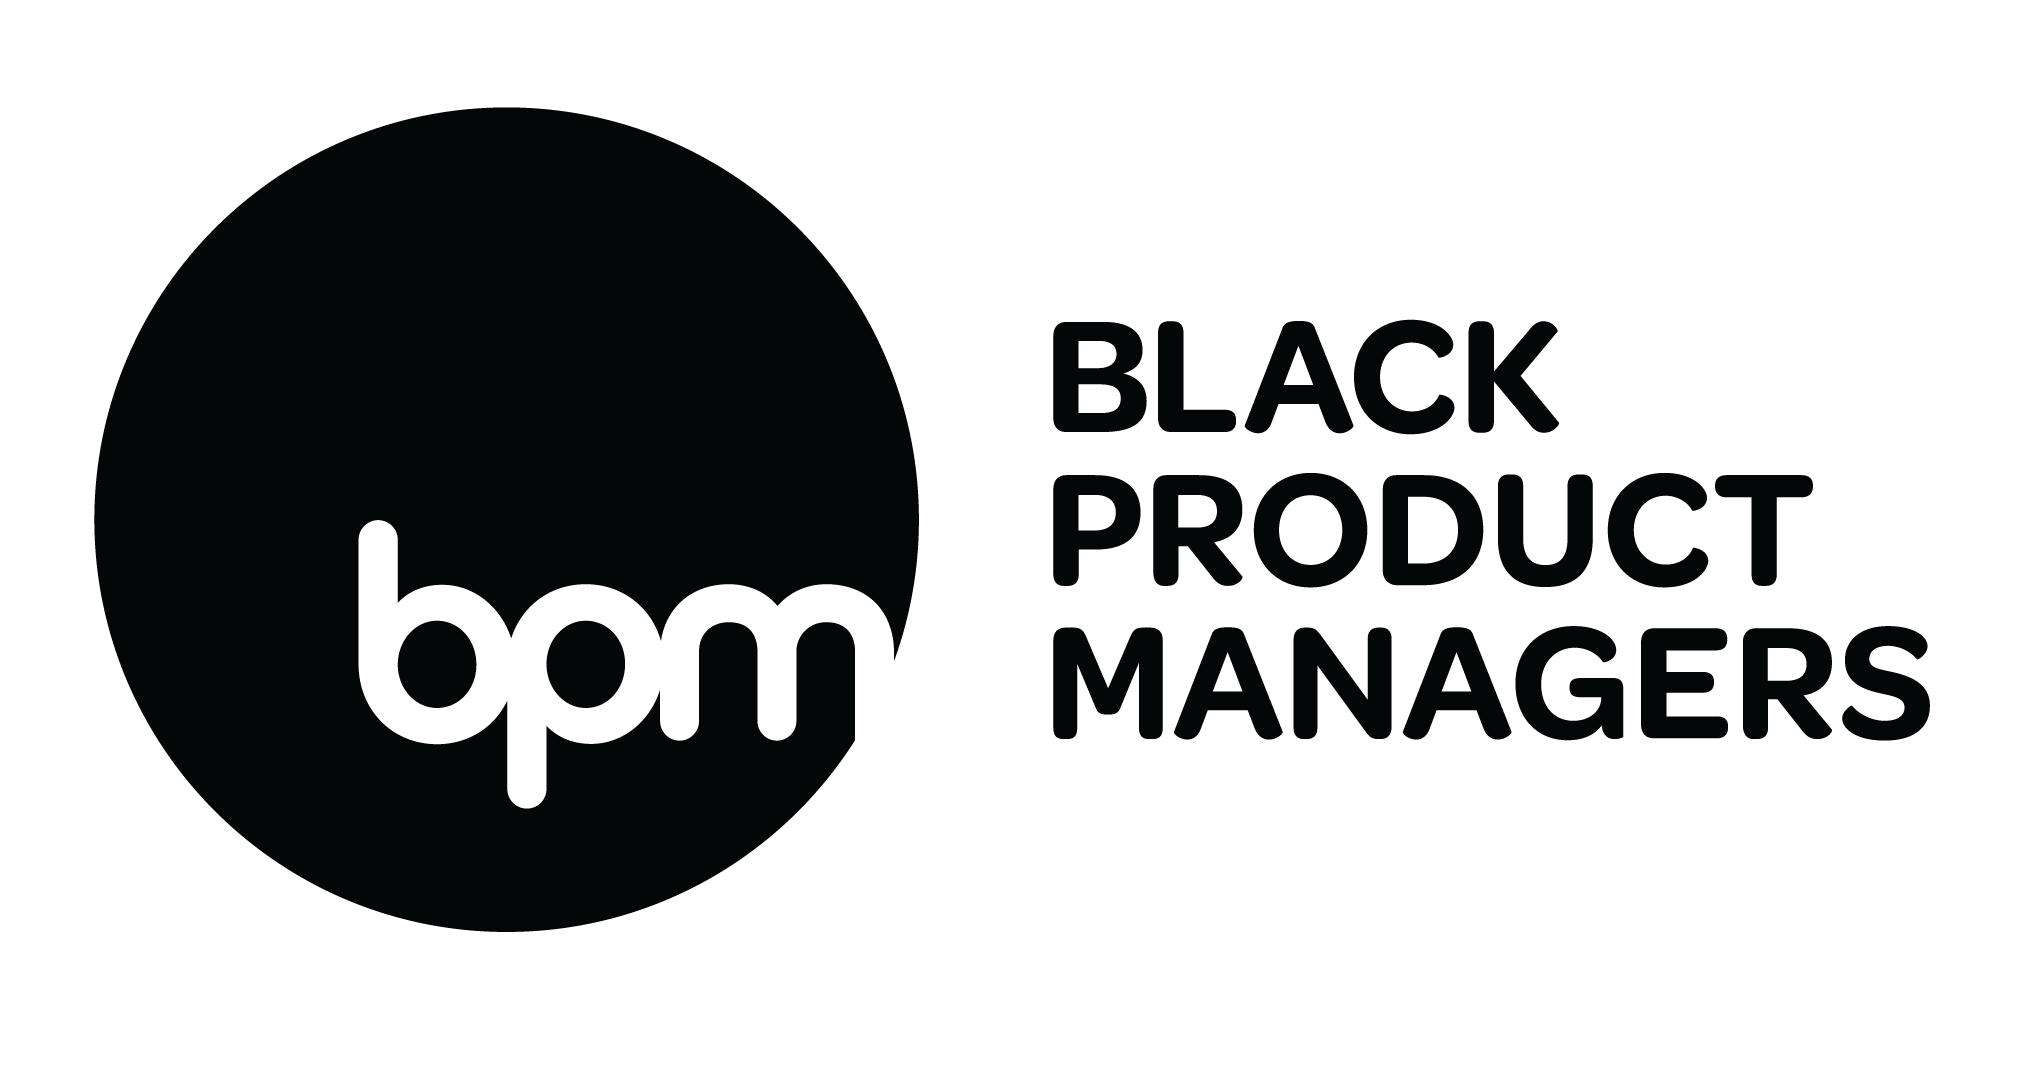 New CEO of Black Product Managers Aims to Expand